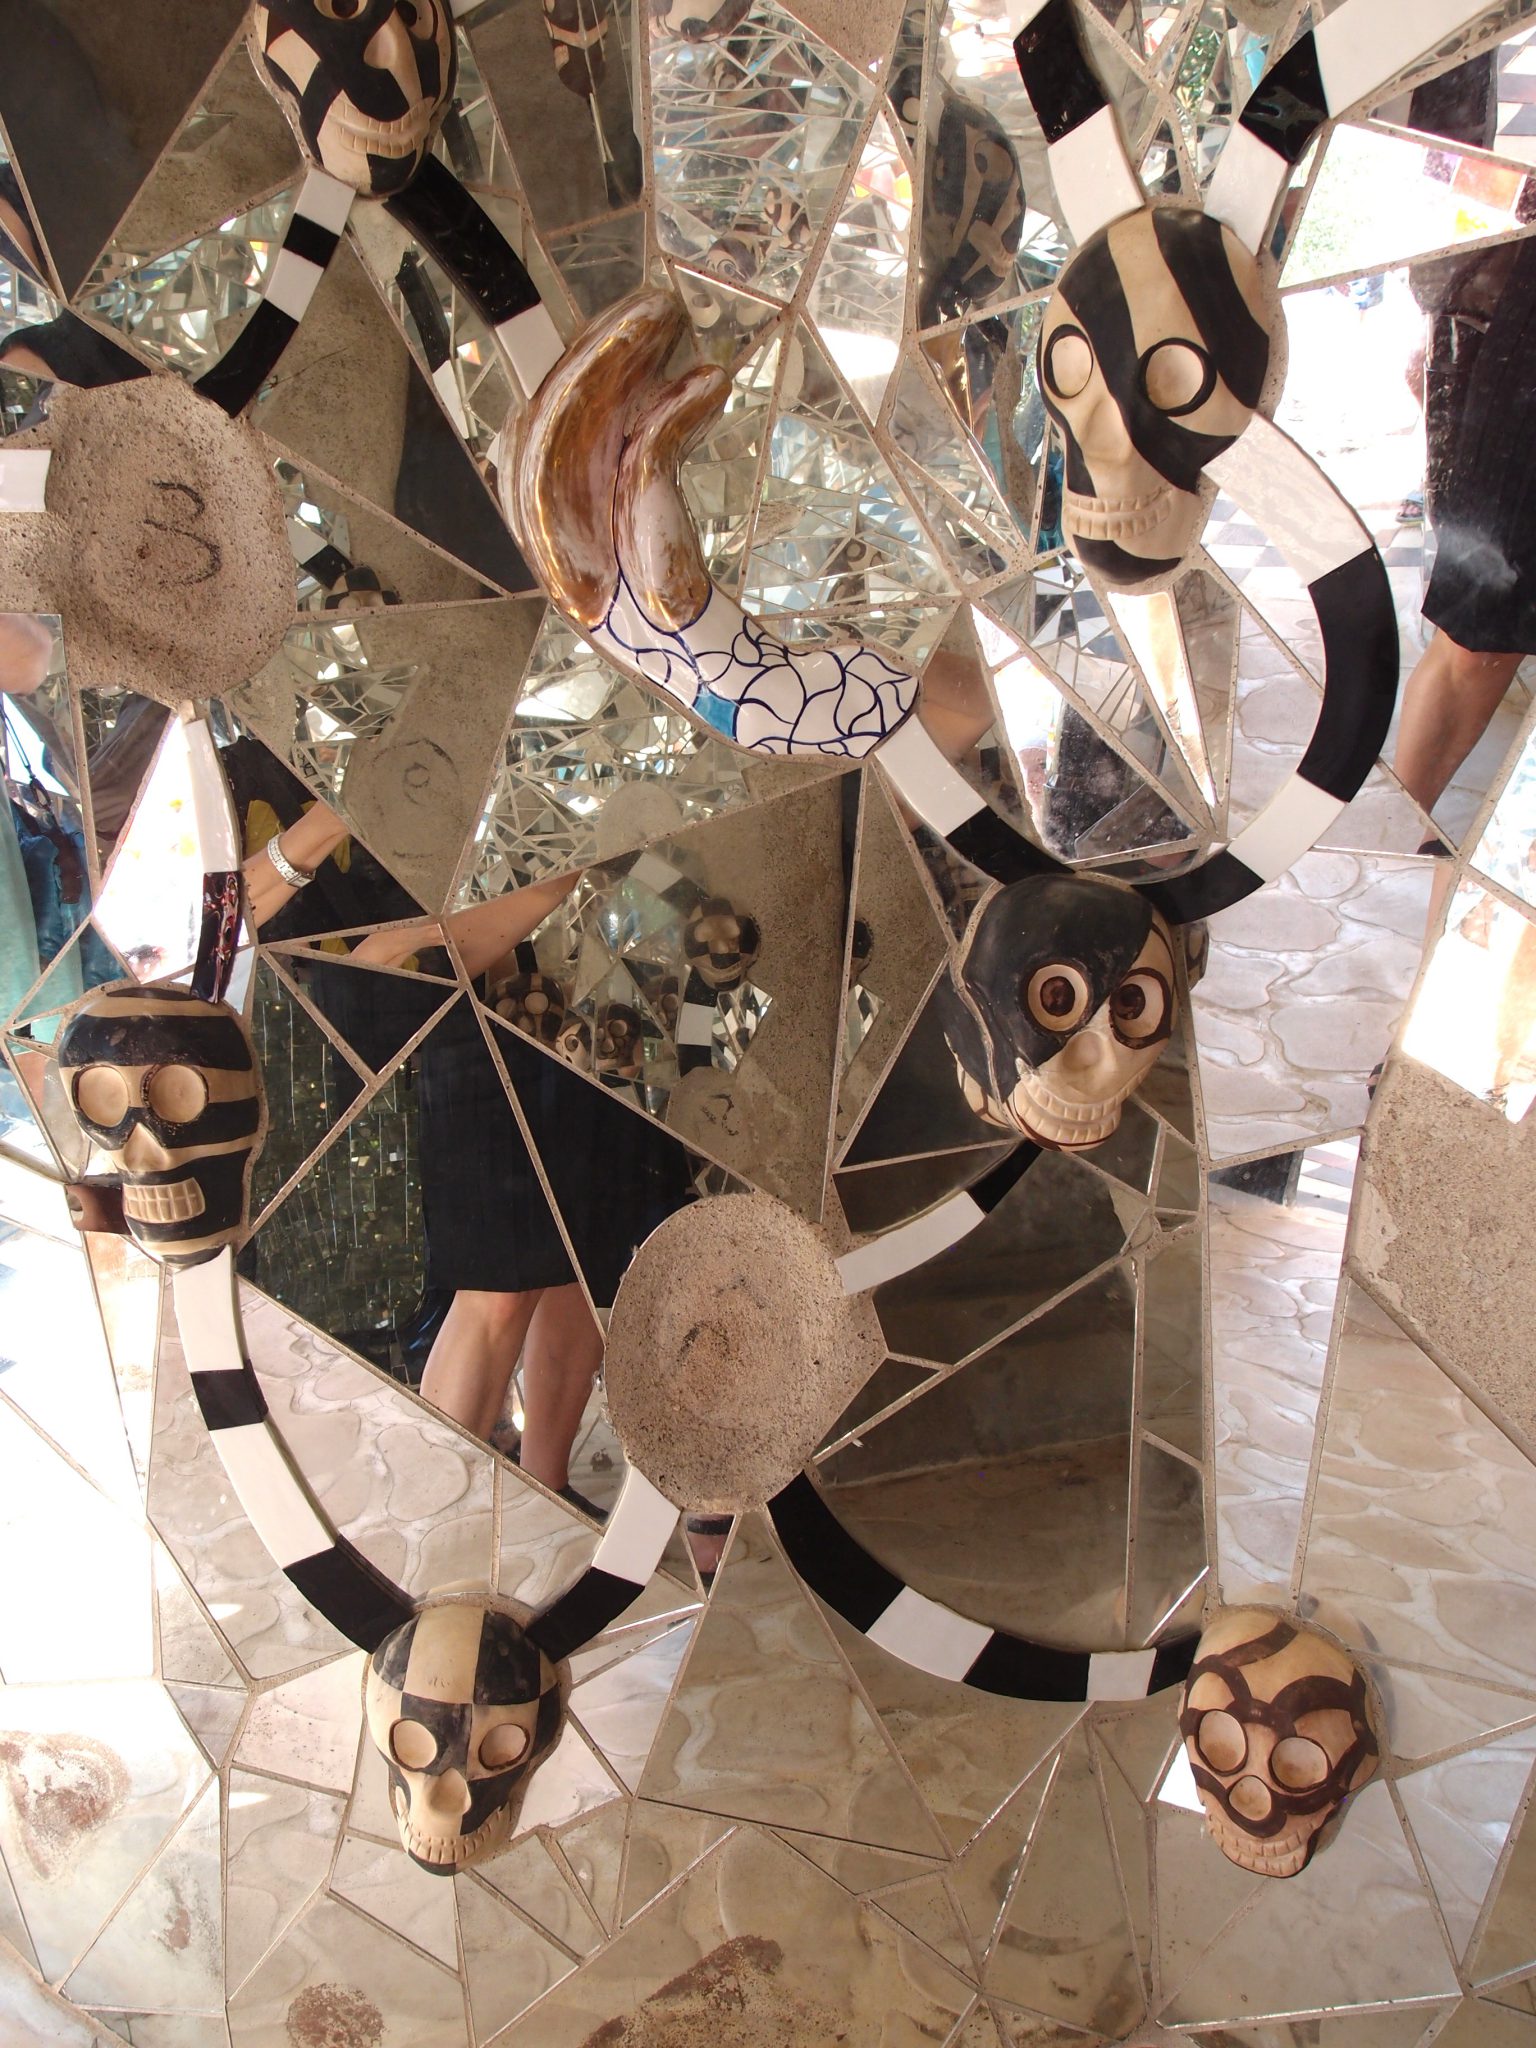 The best thing about being surrounded by shattered mirrors: you can never tell if you're having a Bad Hair Day.